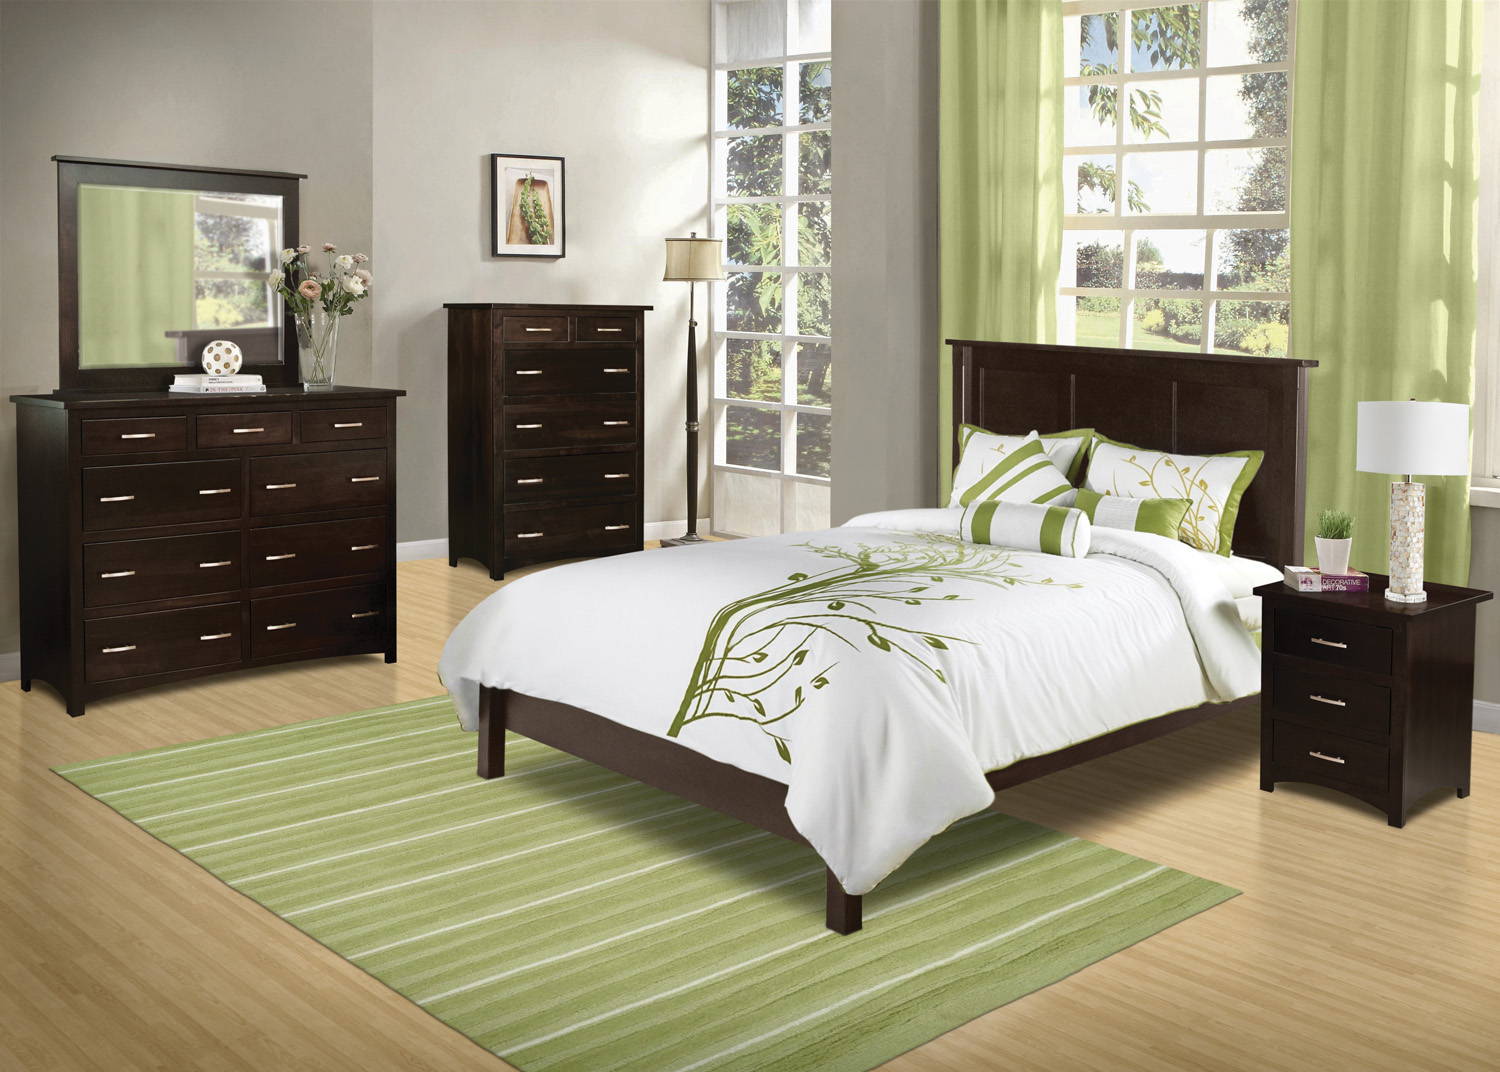 Image of fully customizable Tersigne Mission Bedroom Set through Harvest Home Interiors Amish Solid Wood Furniture